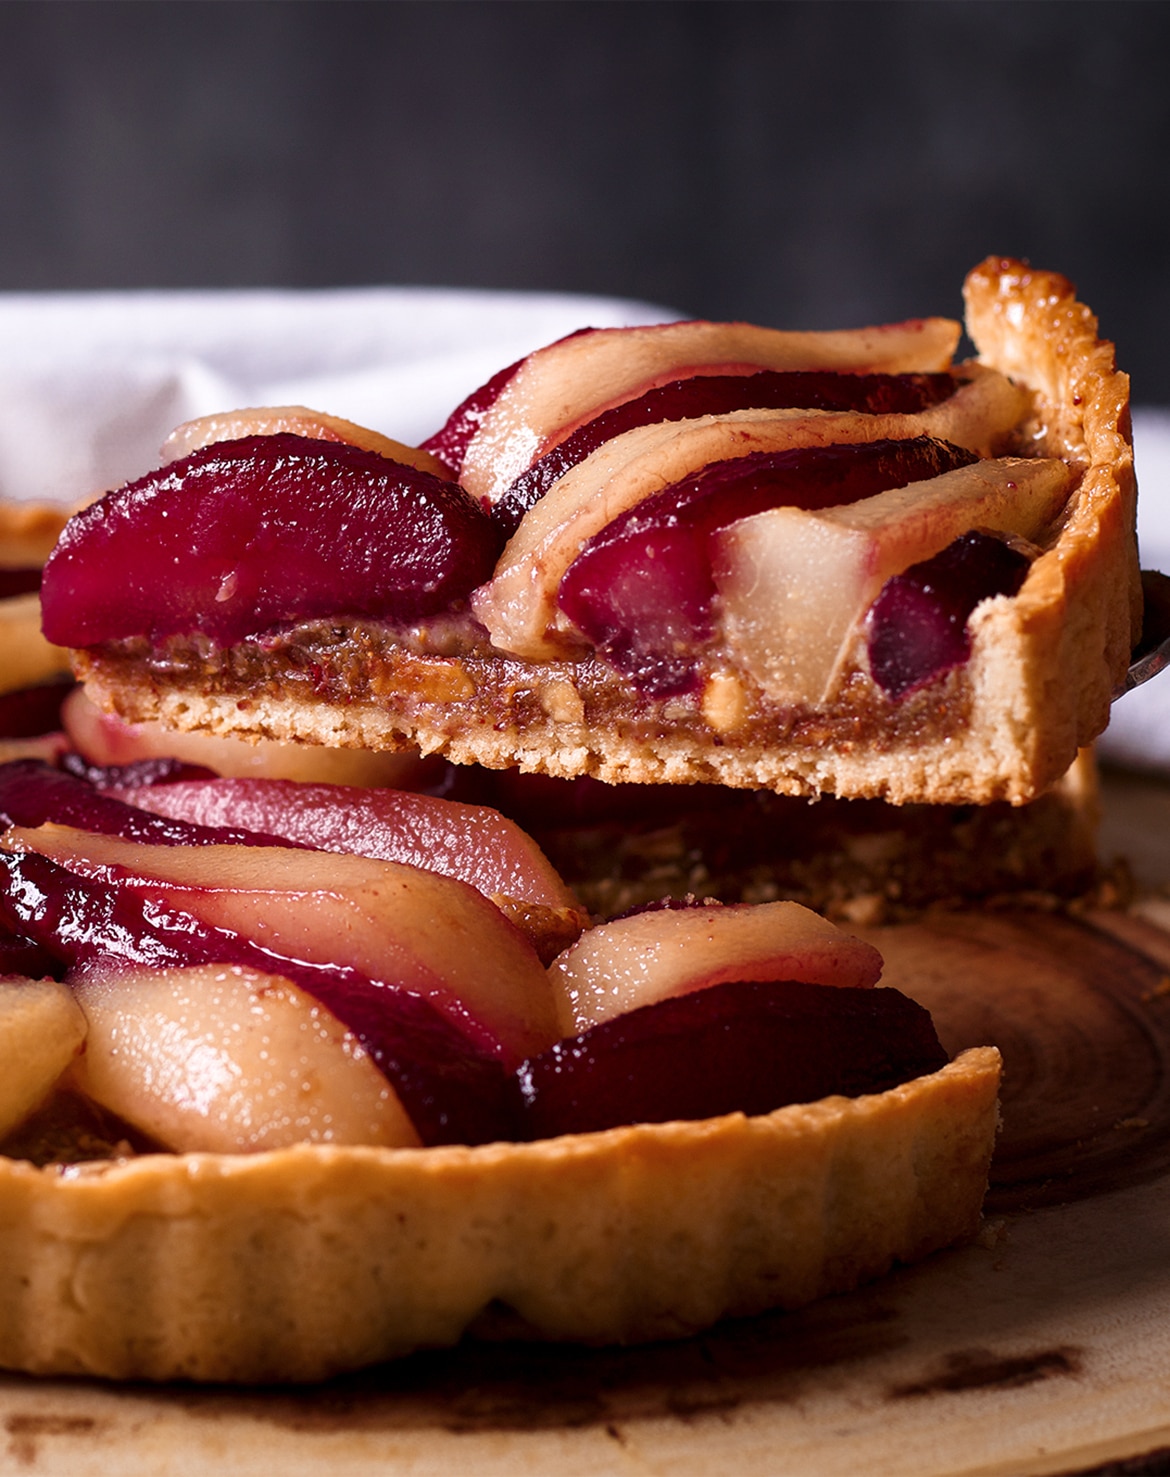 Serving a slice of Pear Tart with Frangipane and Wine Poached Pears